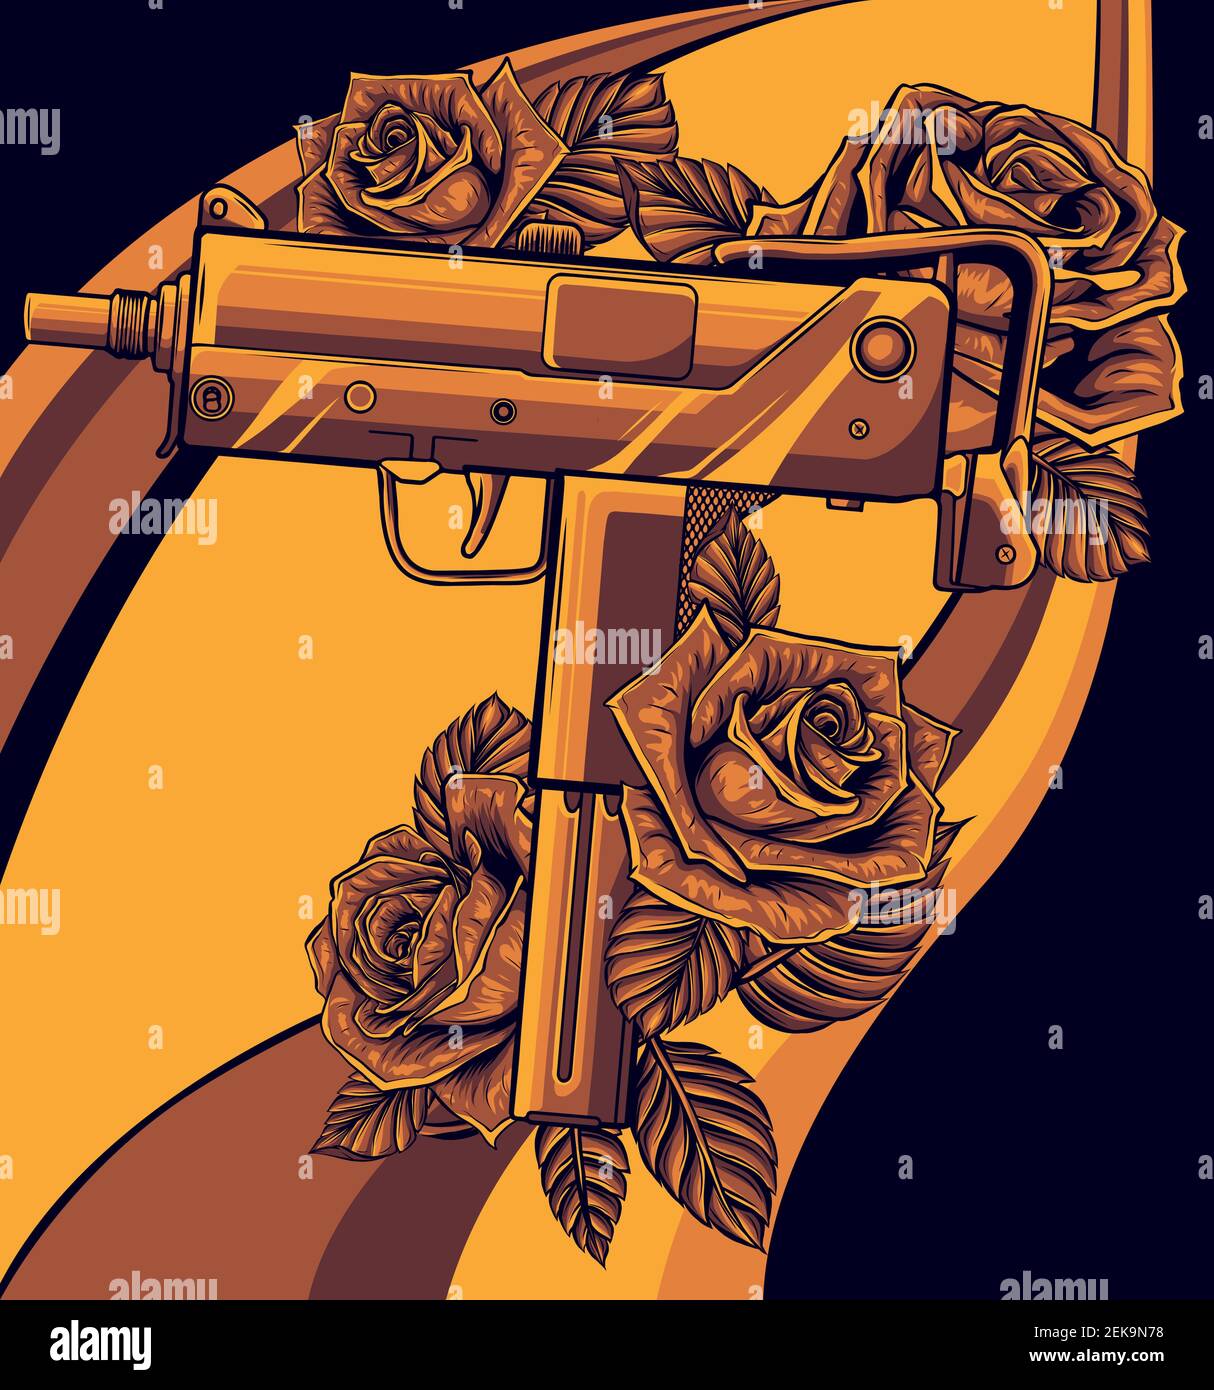 Gun and roses Stock Vector Images - Alamy